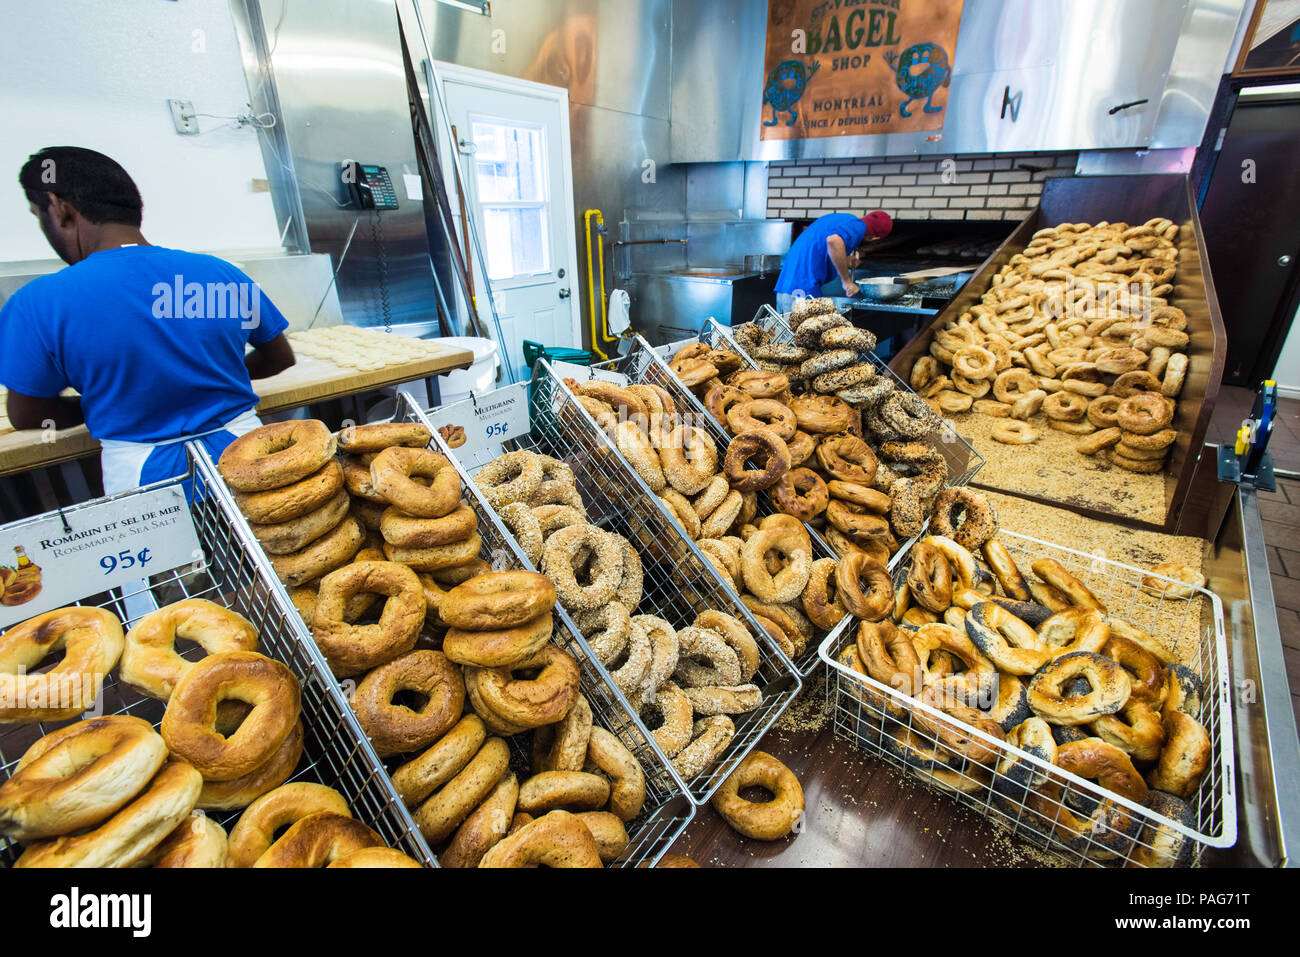 Bagel being prepared and baked at St-Viateur Bagel shop in Montreal Stock Photo